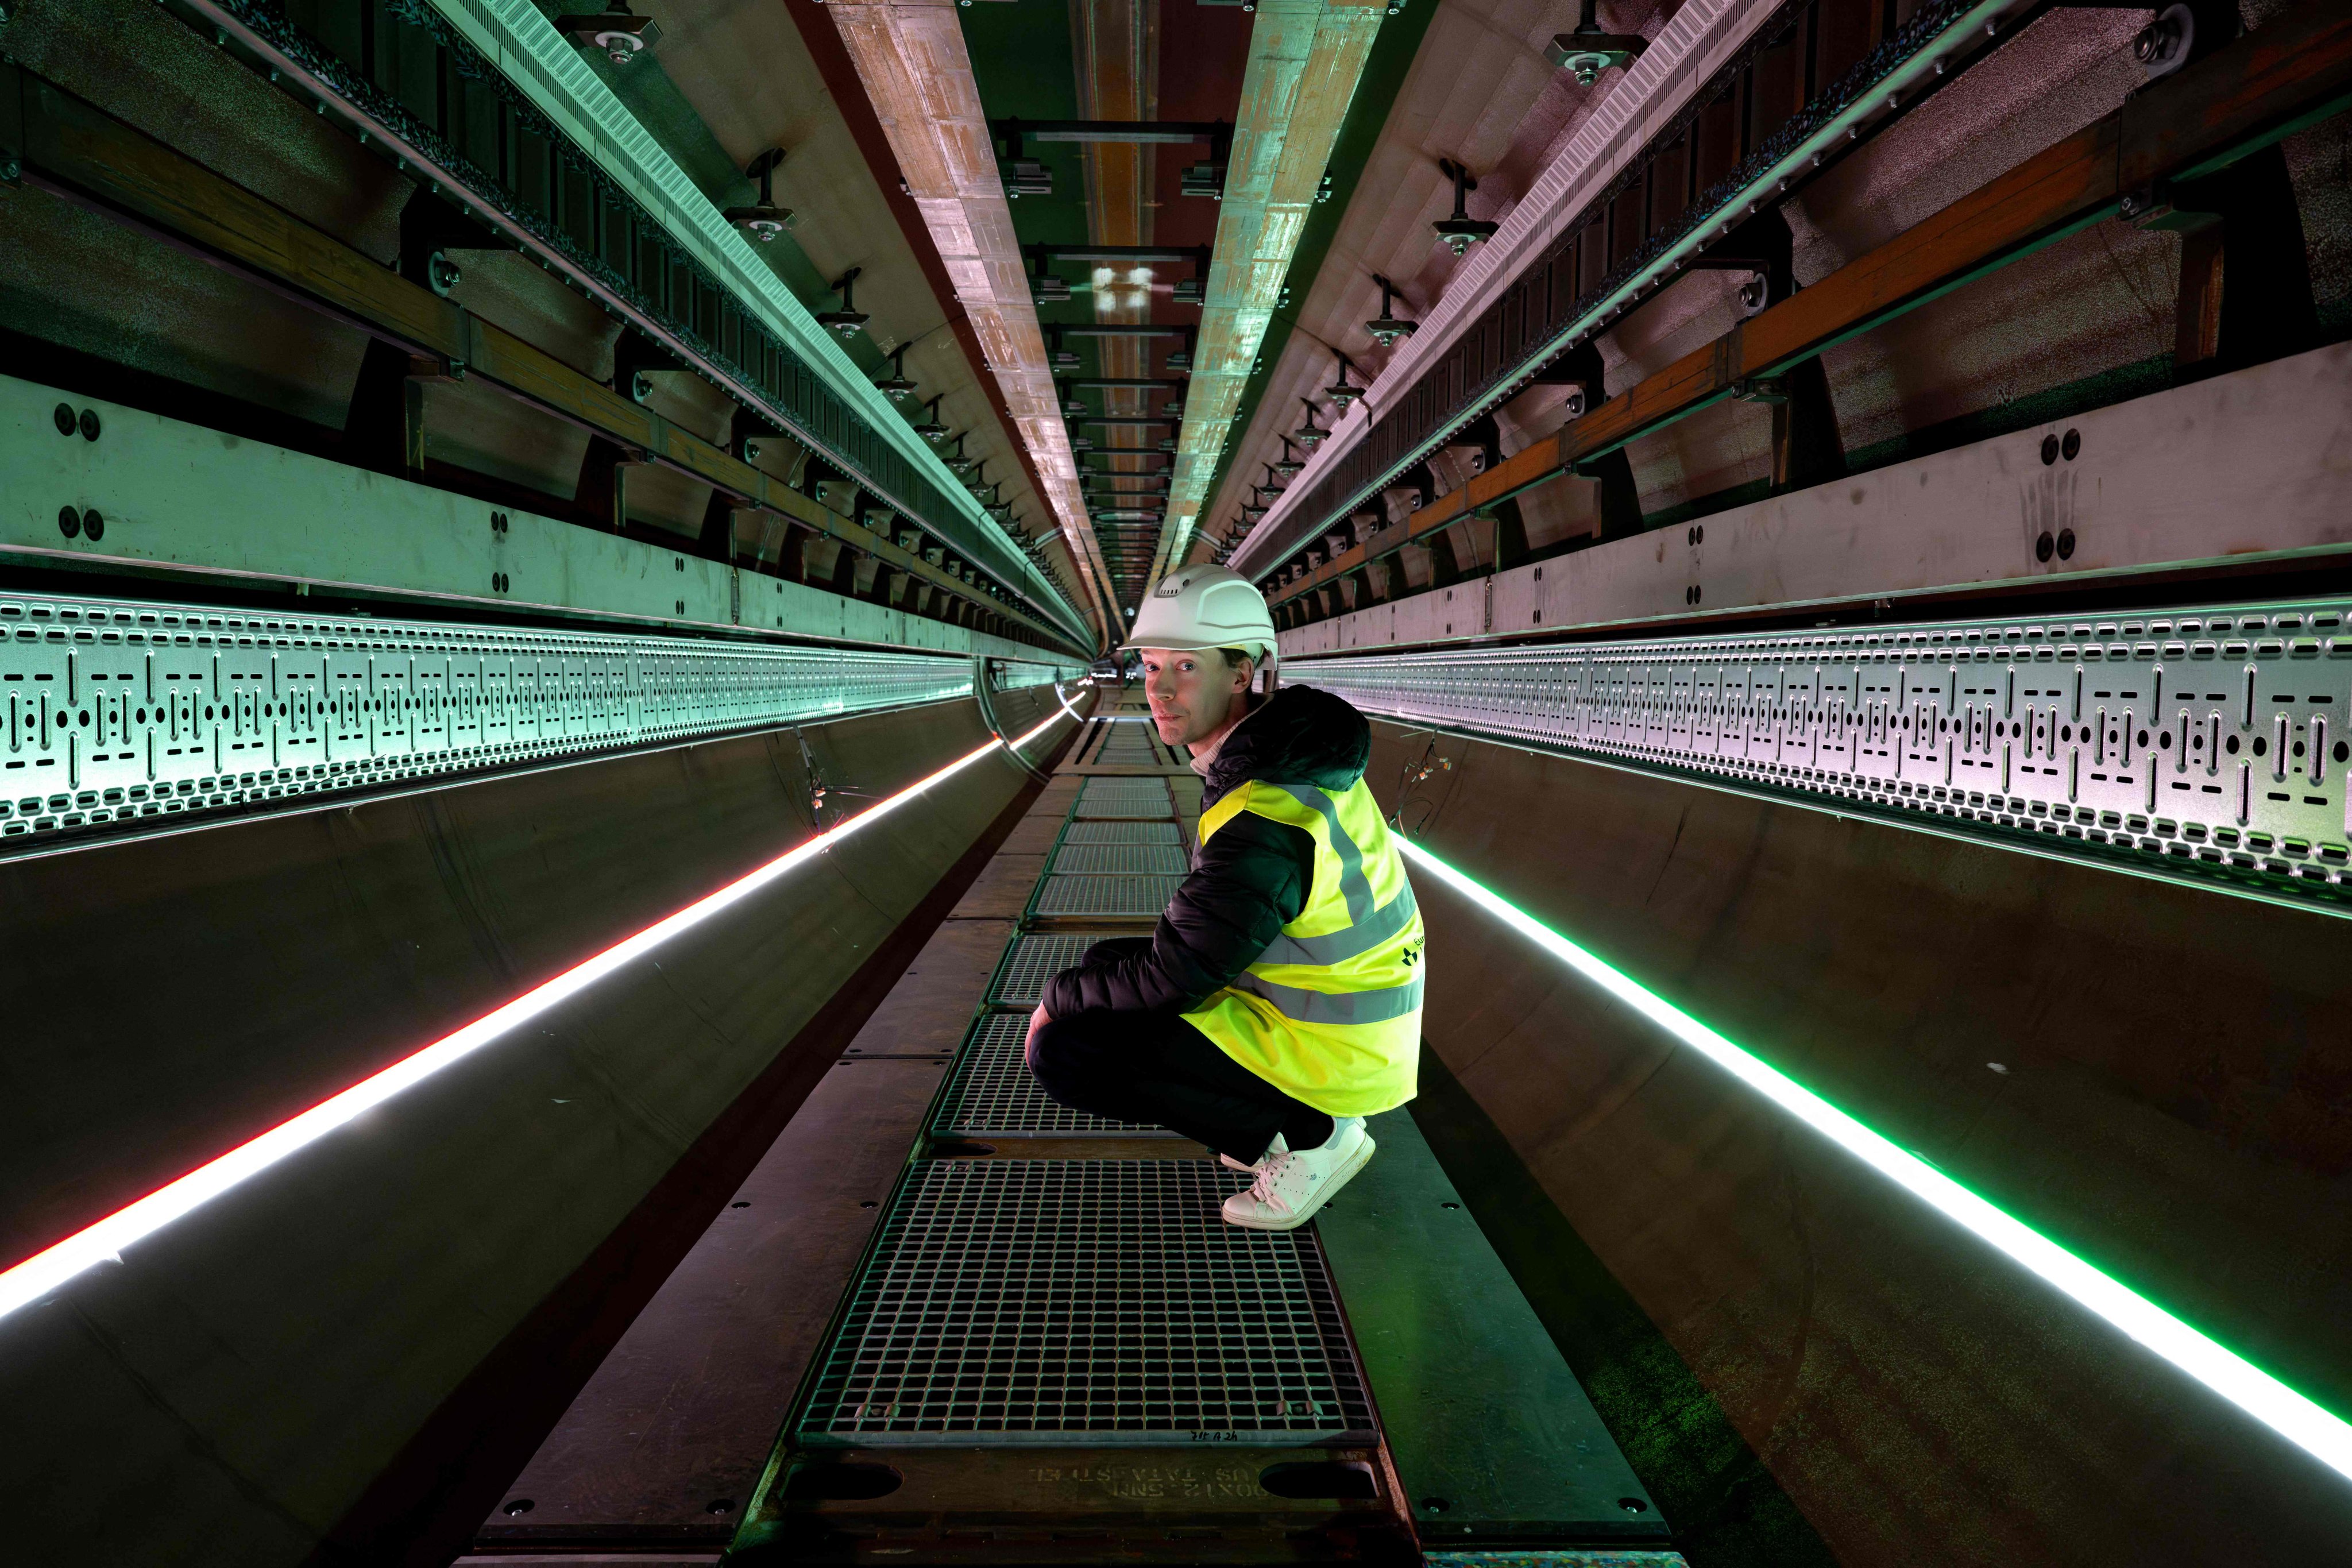 The European Hyperloop Centre has built a 420-metre tunnel as a testing facility to develop hyperloop technologies as a potential future sustainable transportation system. Photo: AFP